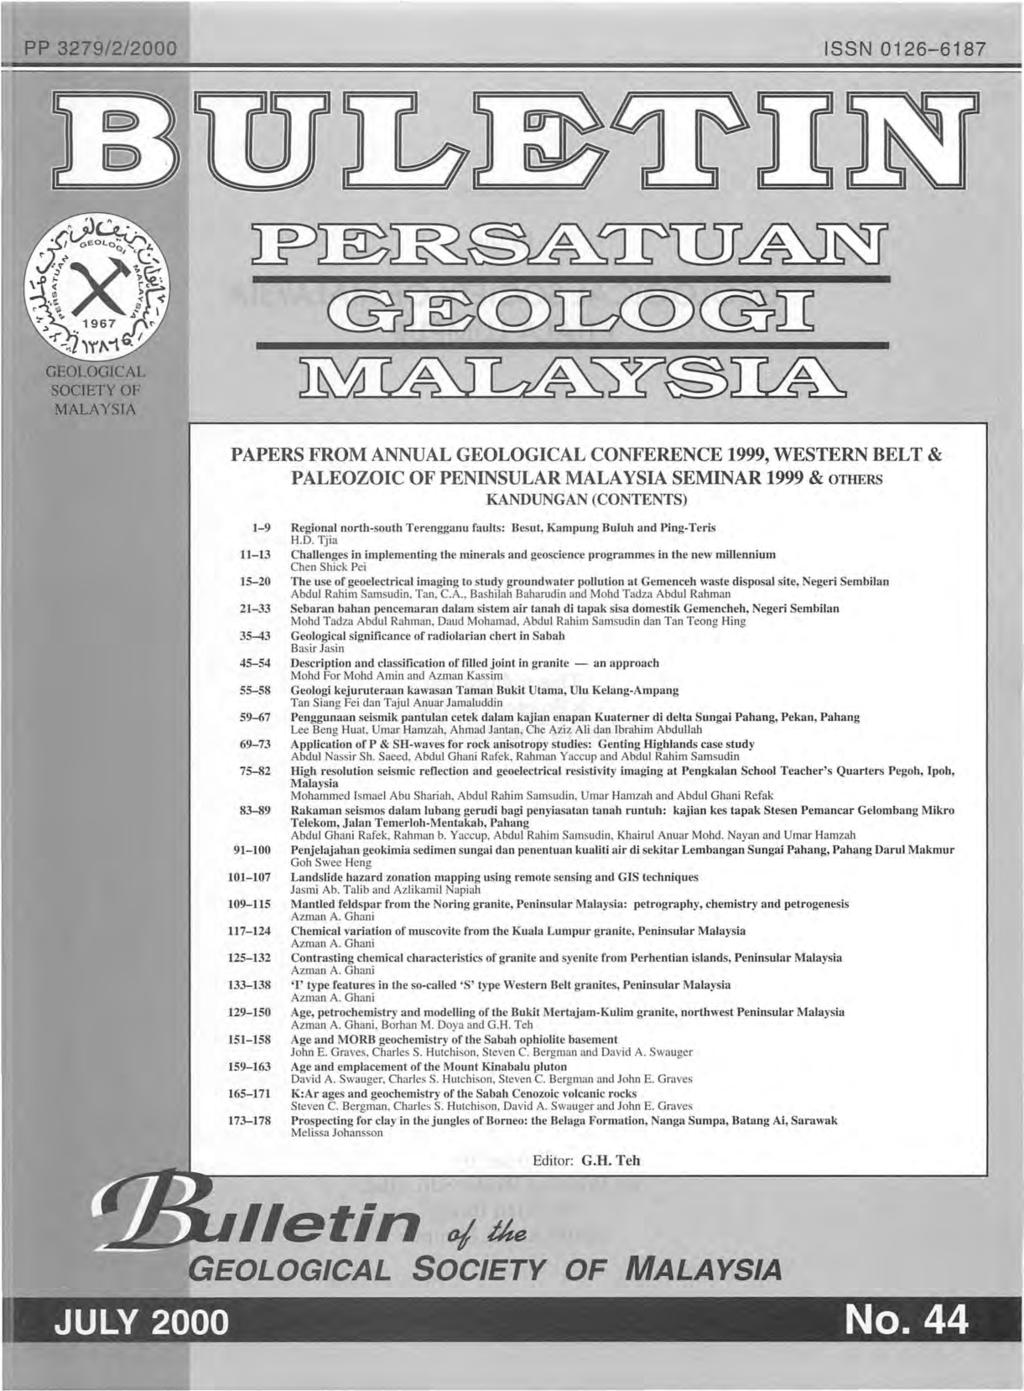 PP 3279/2/2000 ISSN 0126-6187 PAPERS FROM ANNUAL GEOLOGICAL CONFERENCE 1999, WESTERN BELT & PALEOZOIC OF PENINSULAR MALAYSIA SEMINAR 1999 & OTHERS KANDUNGAN (CONTENTS) 1-9 Regional north-south